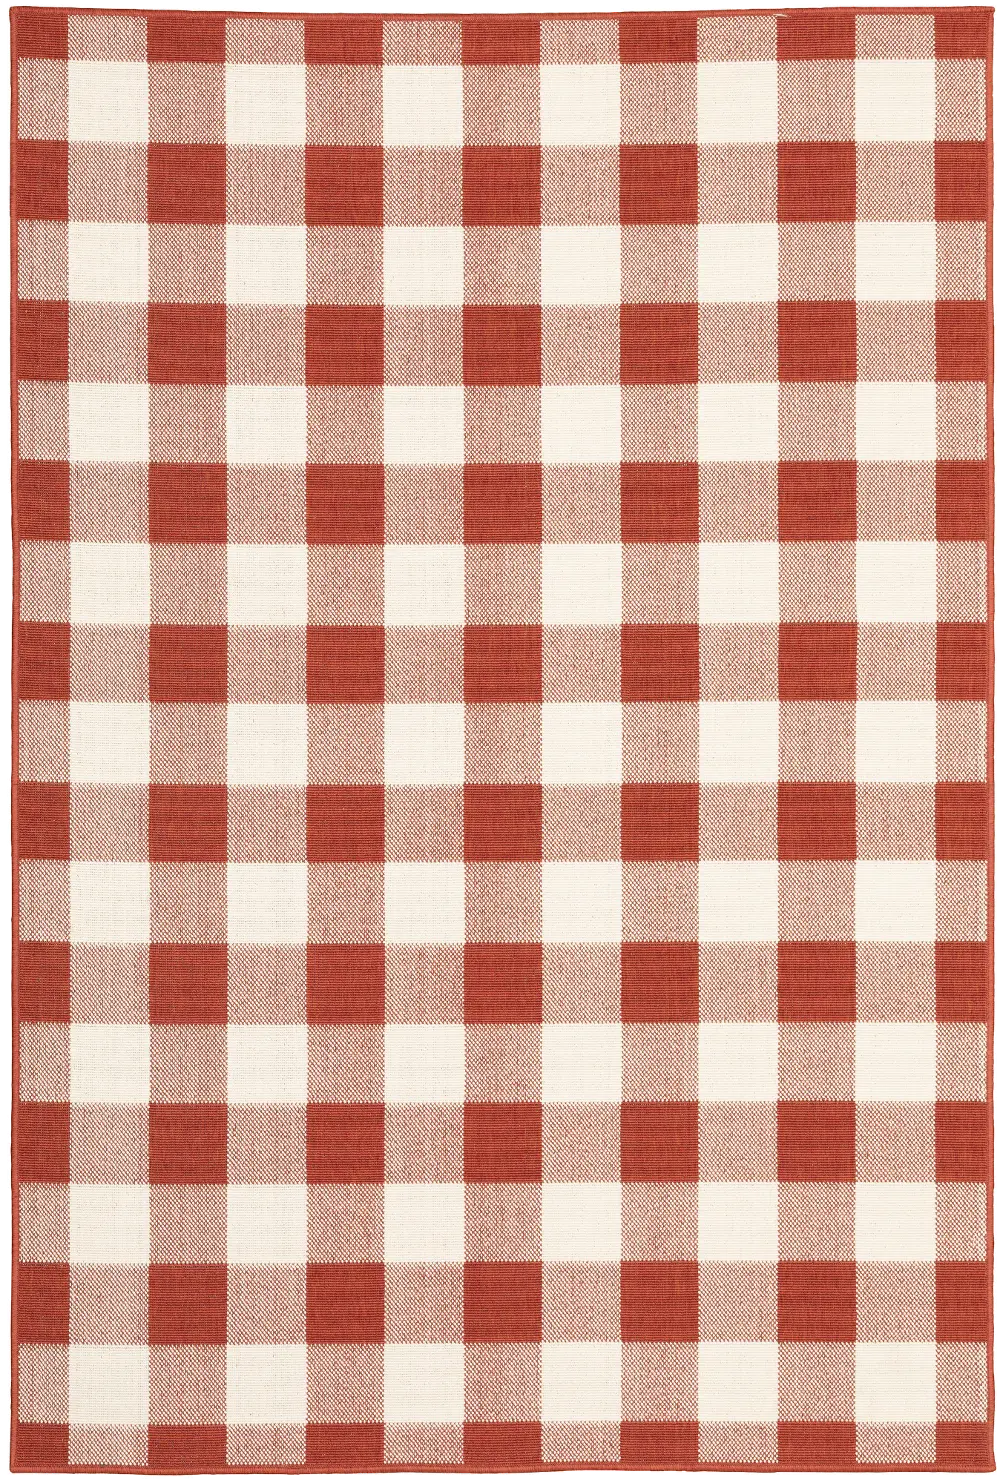 Plaid Red and Ivory Indoor-Outdoor 8 Foot Runner Rug - Marina-1